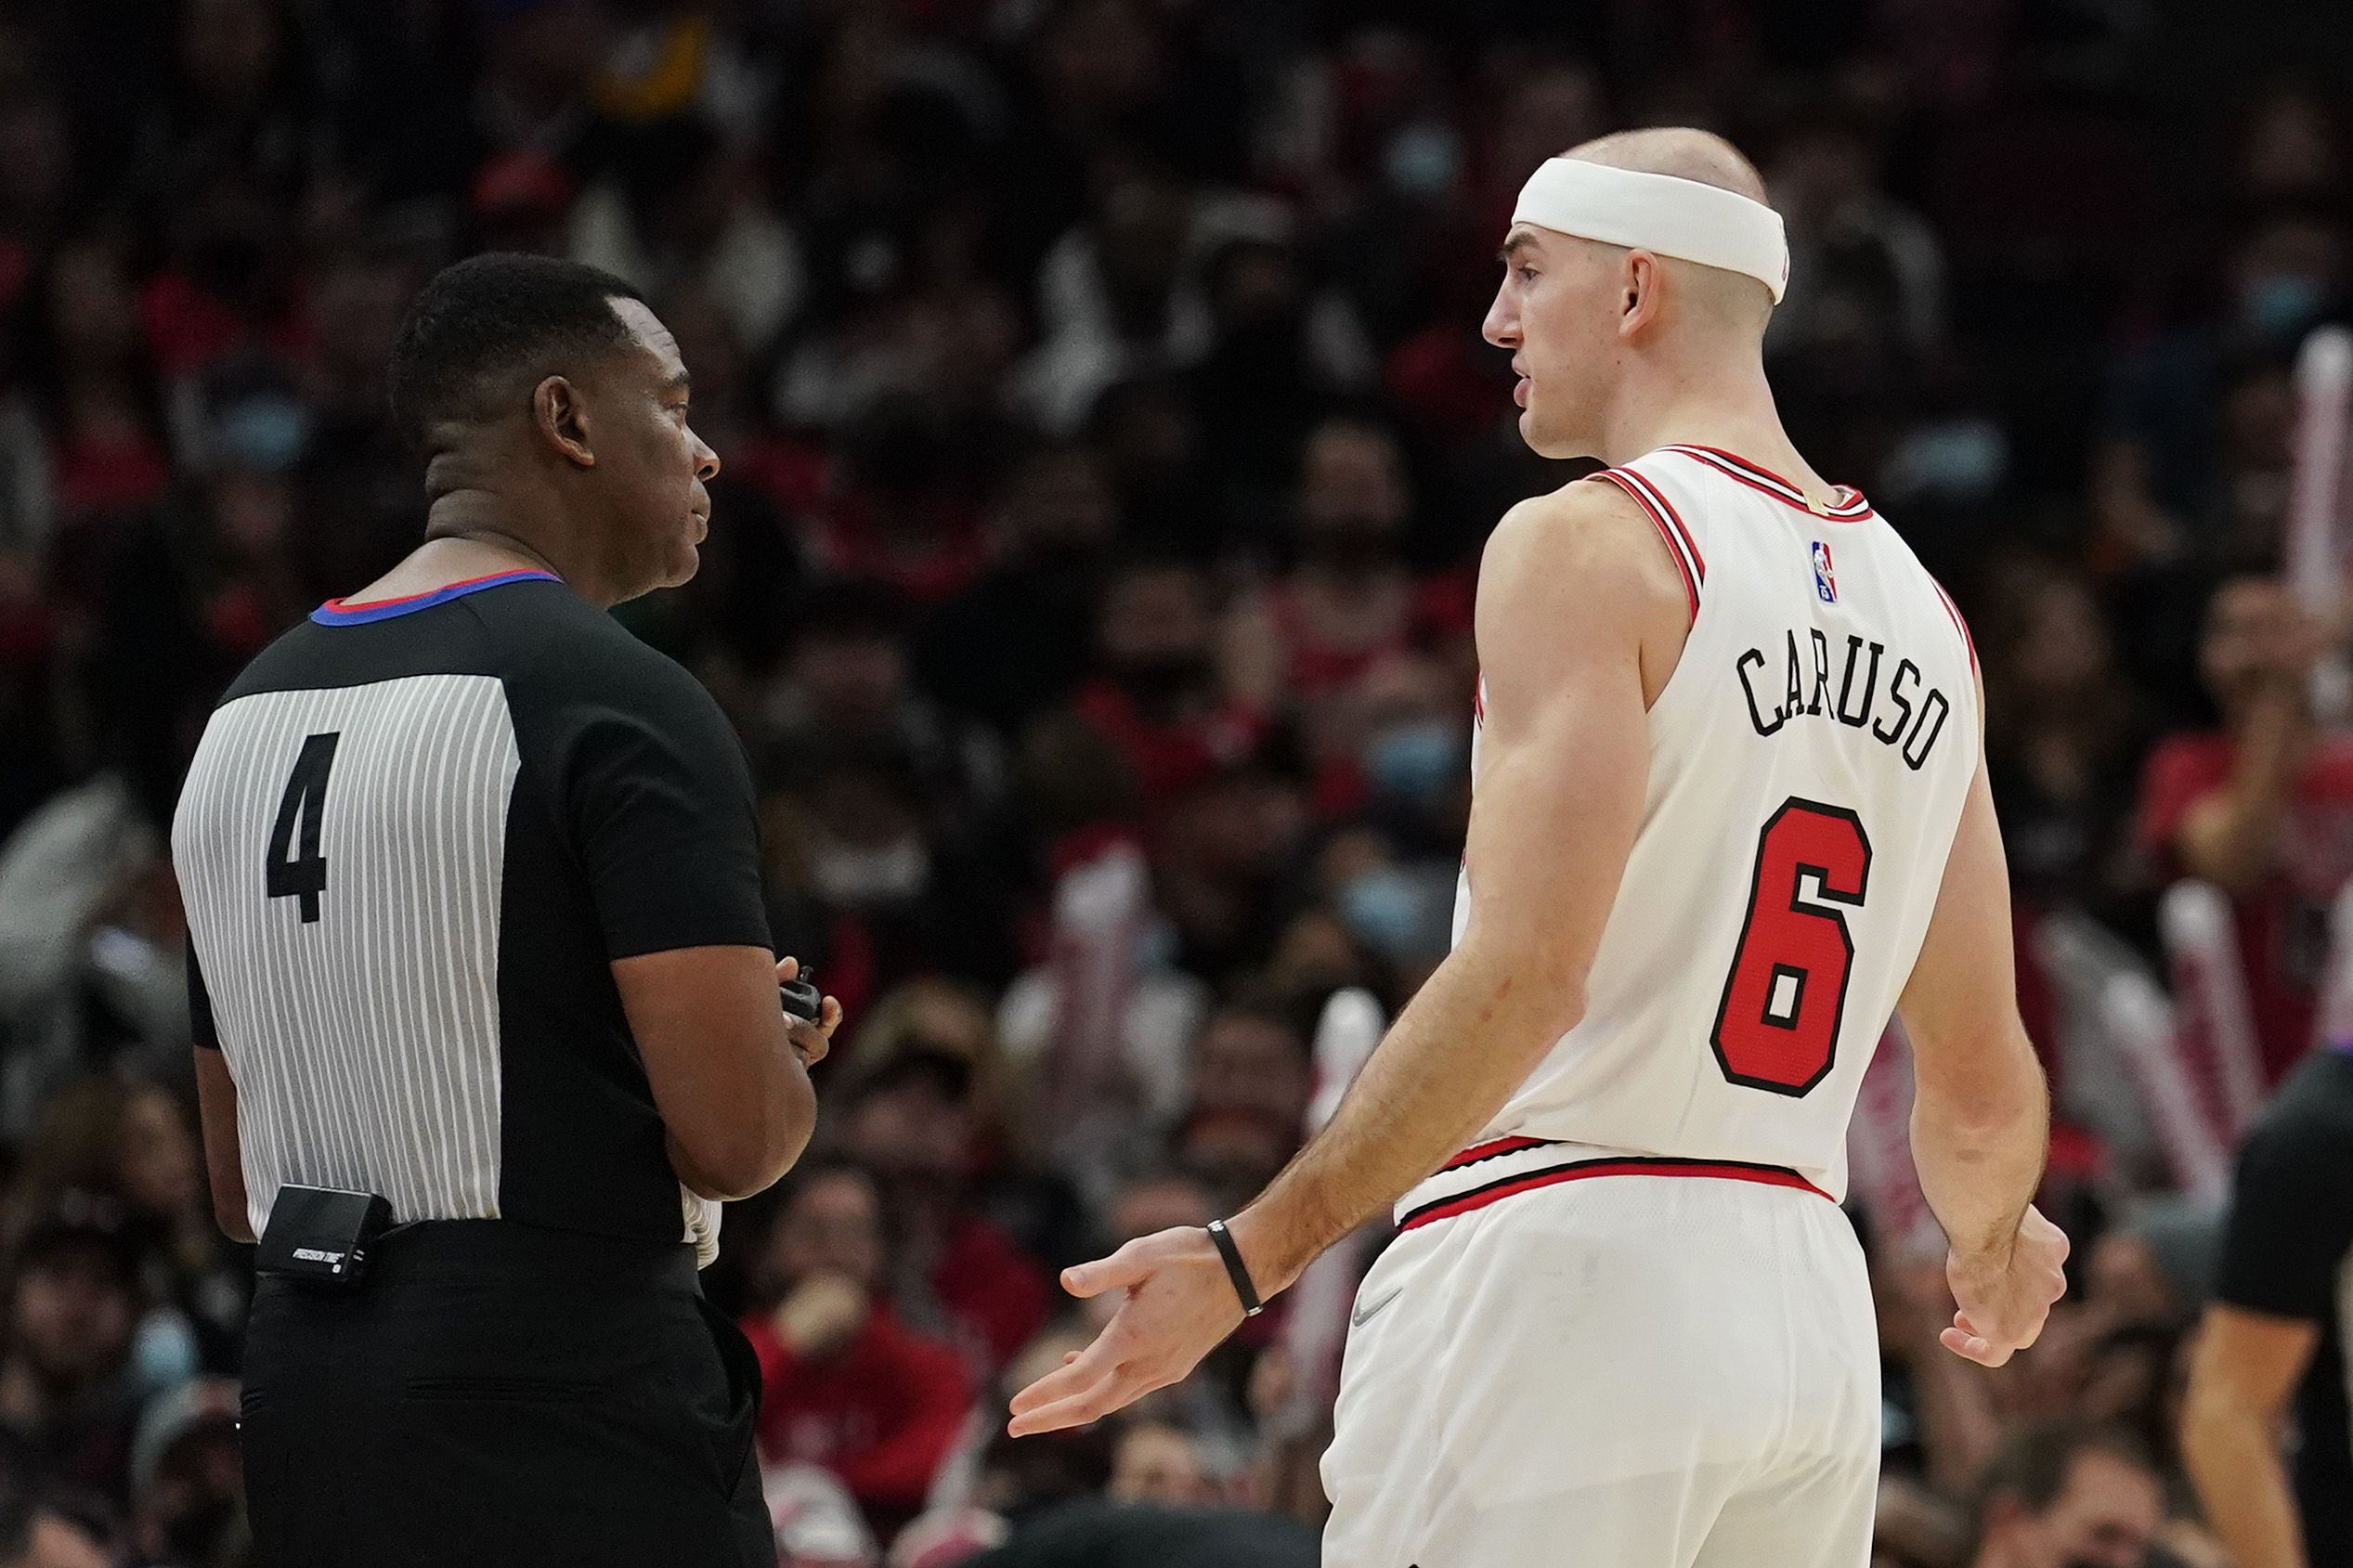 Chicago Bulls guard Alex Caruso argues with an official during an NBA game in November 2021